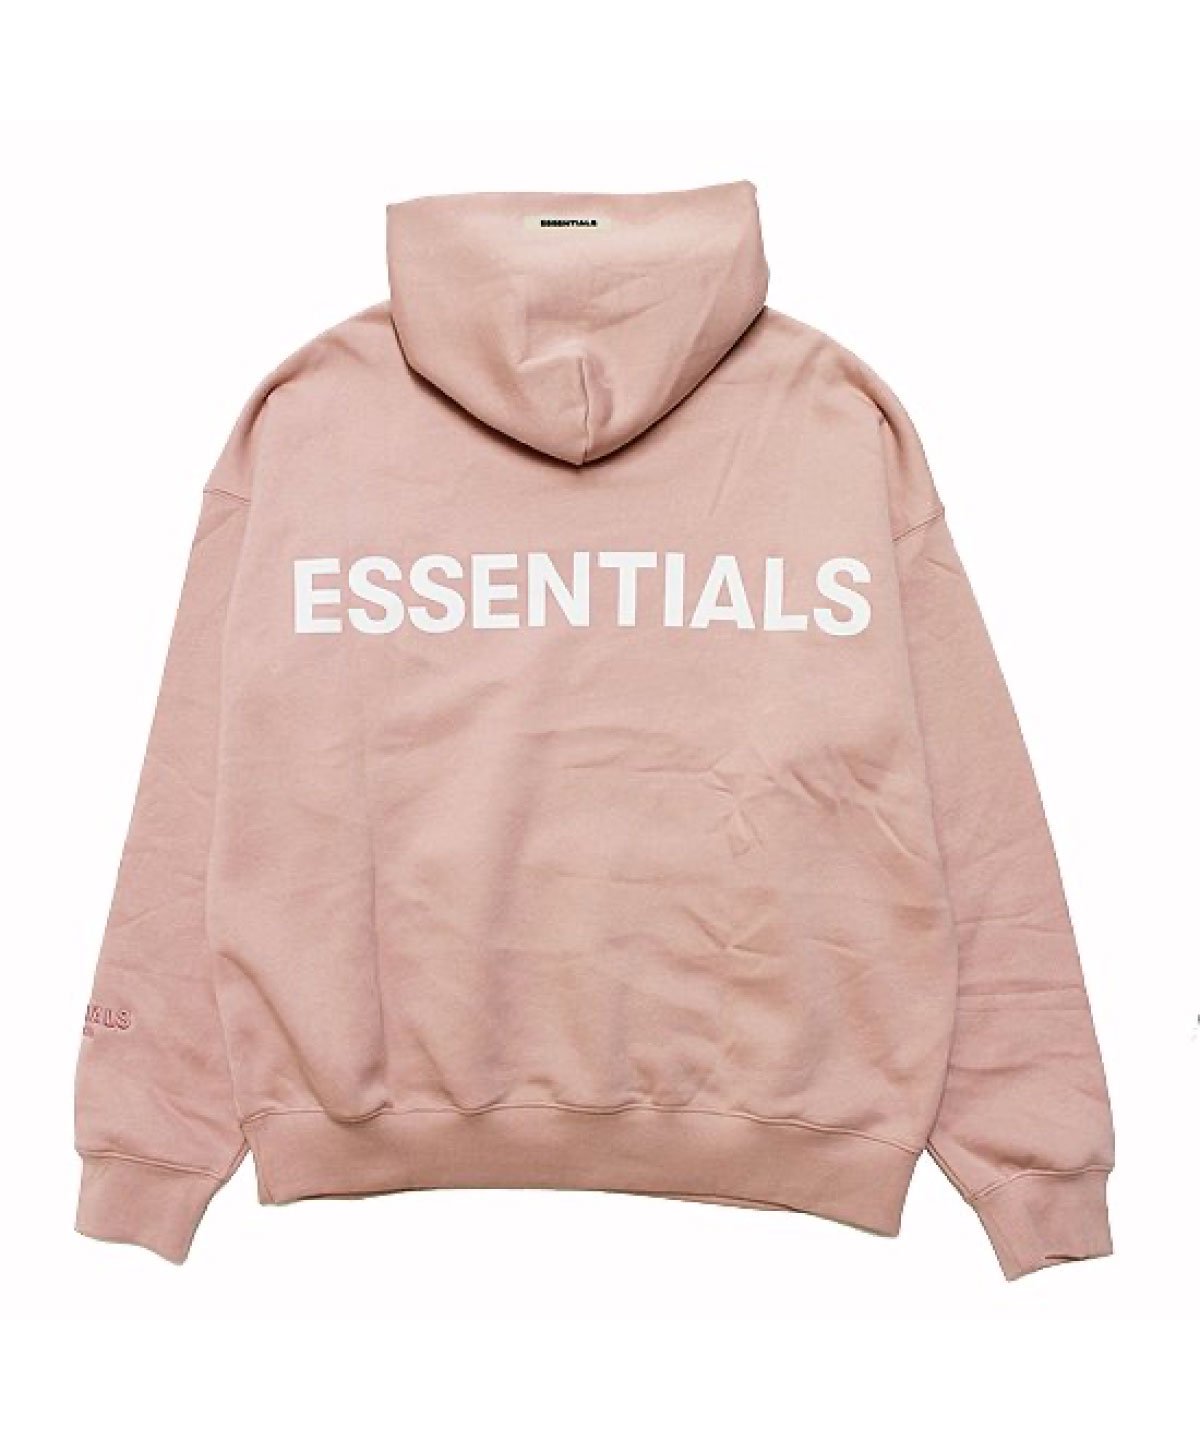 FOG ESSENTIALS リフレクターロゴフーディ - Fear Of God Essentials Pullover Hoodie PINK -  M's by FLASHBACK公式通販サイト